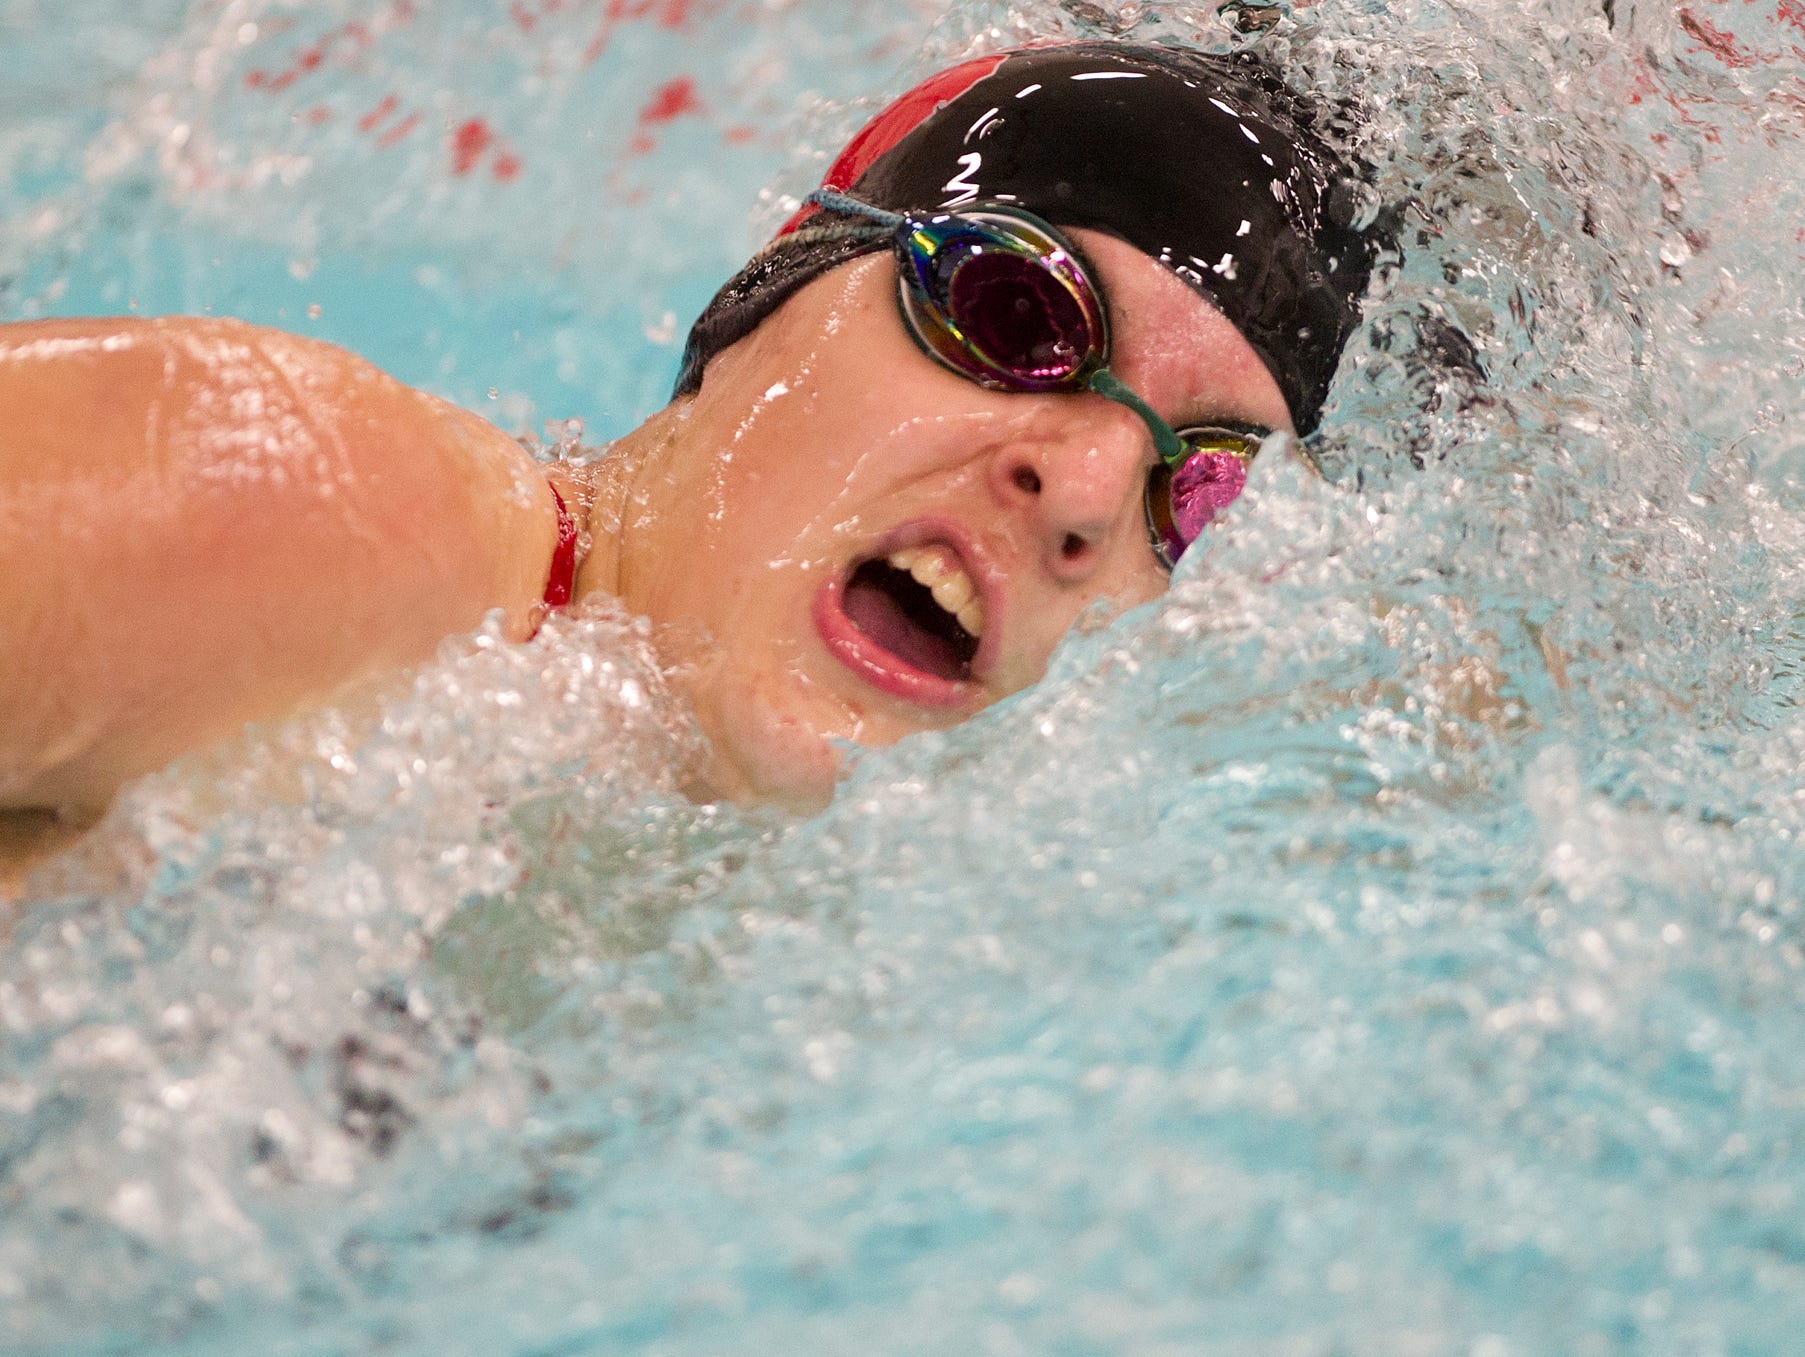 Junior Alex Raczek was the lone individual for SPASH to qualify for the WIAA Division 1 state swimming meet at the UW Natatorium on Saturday in Madison.